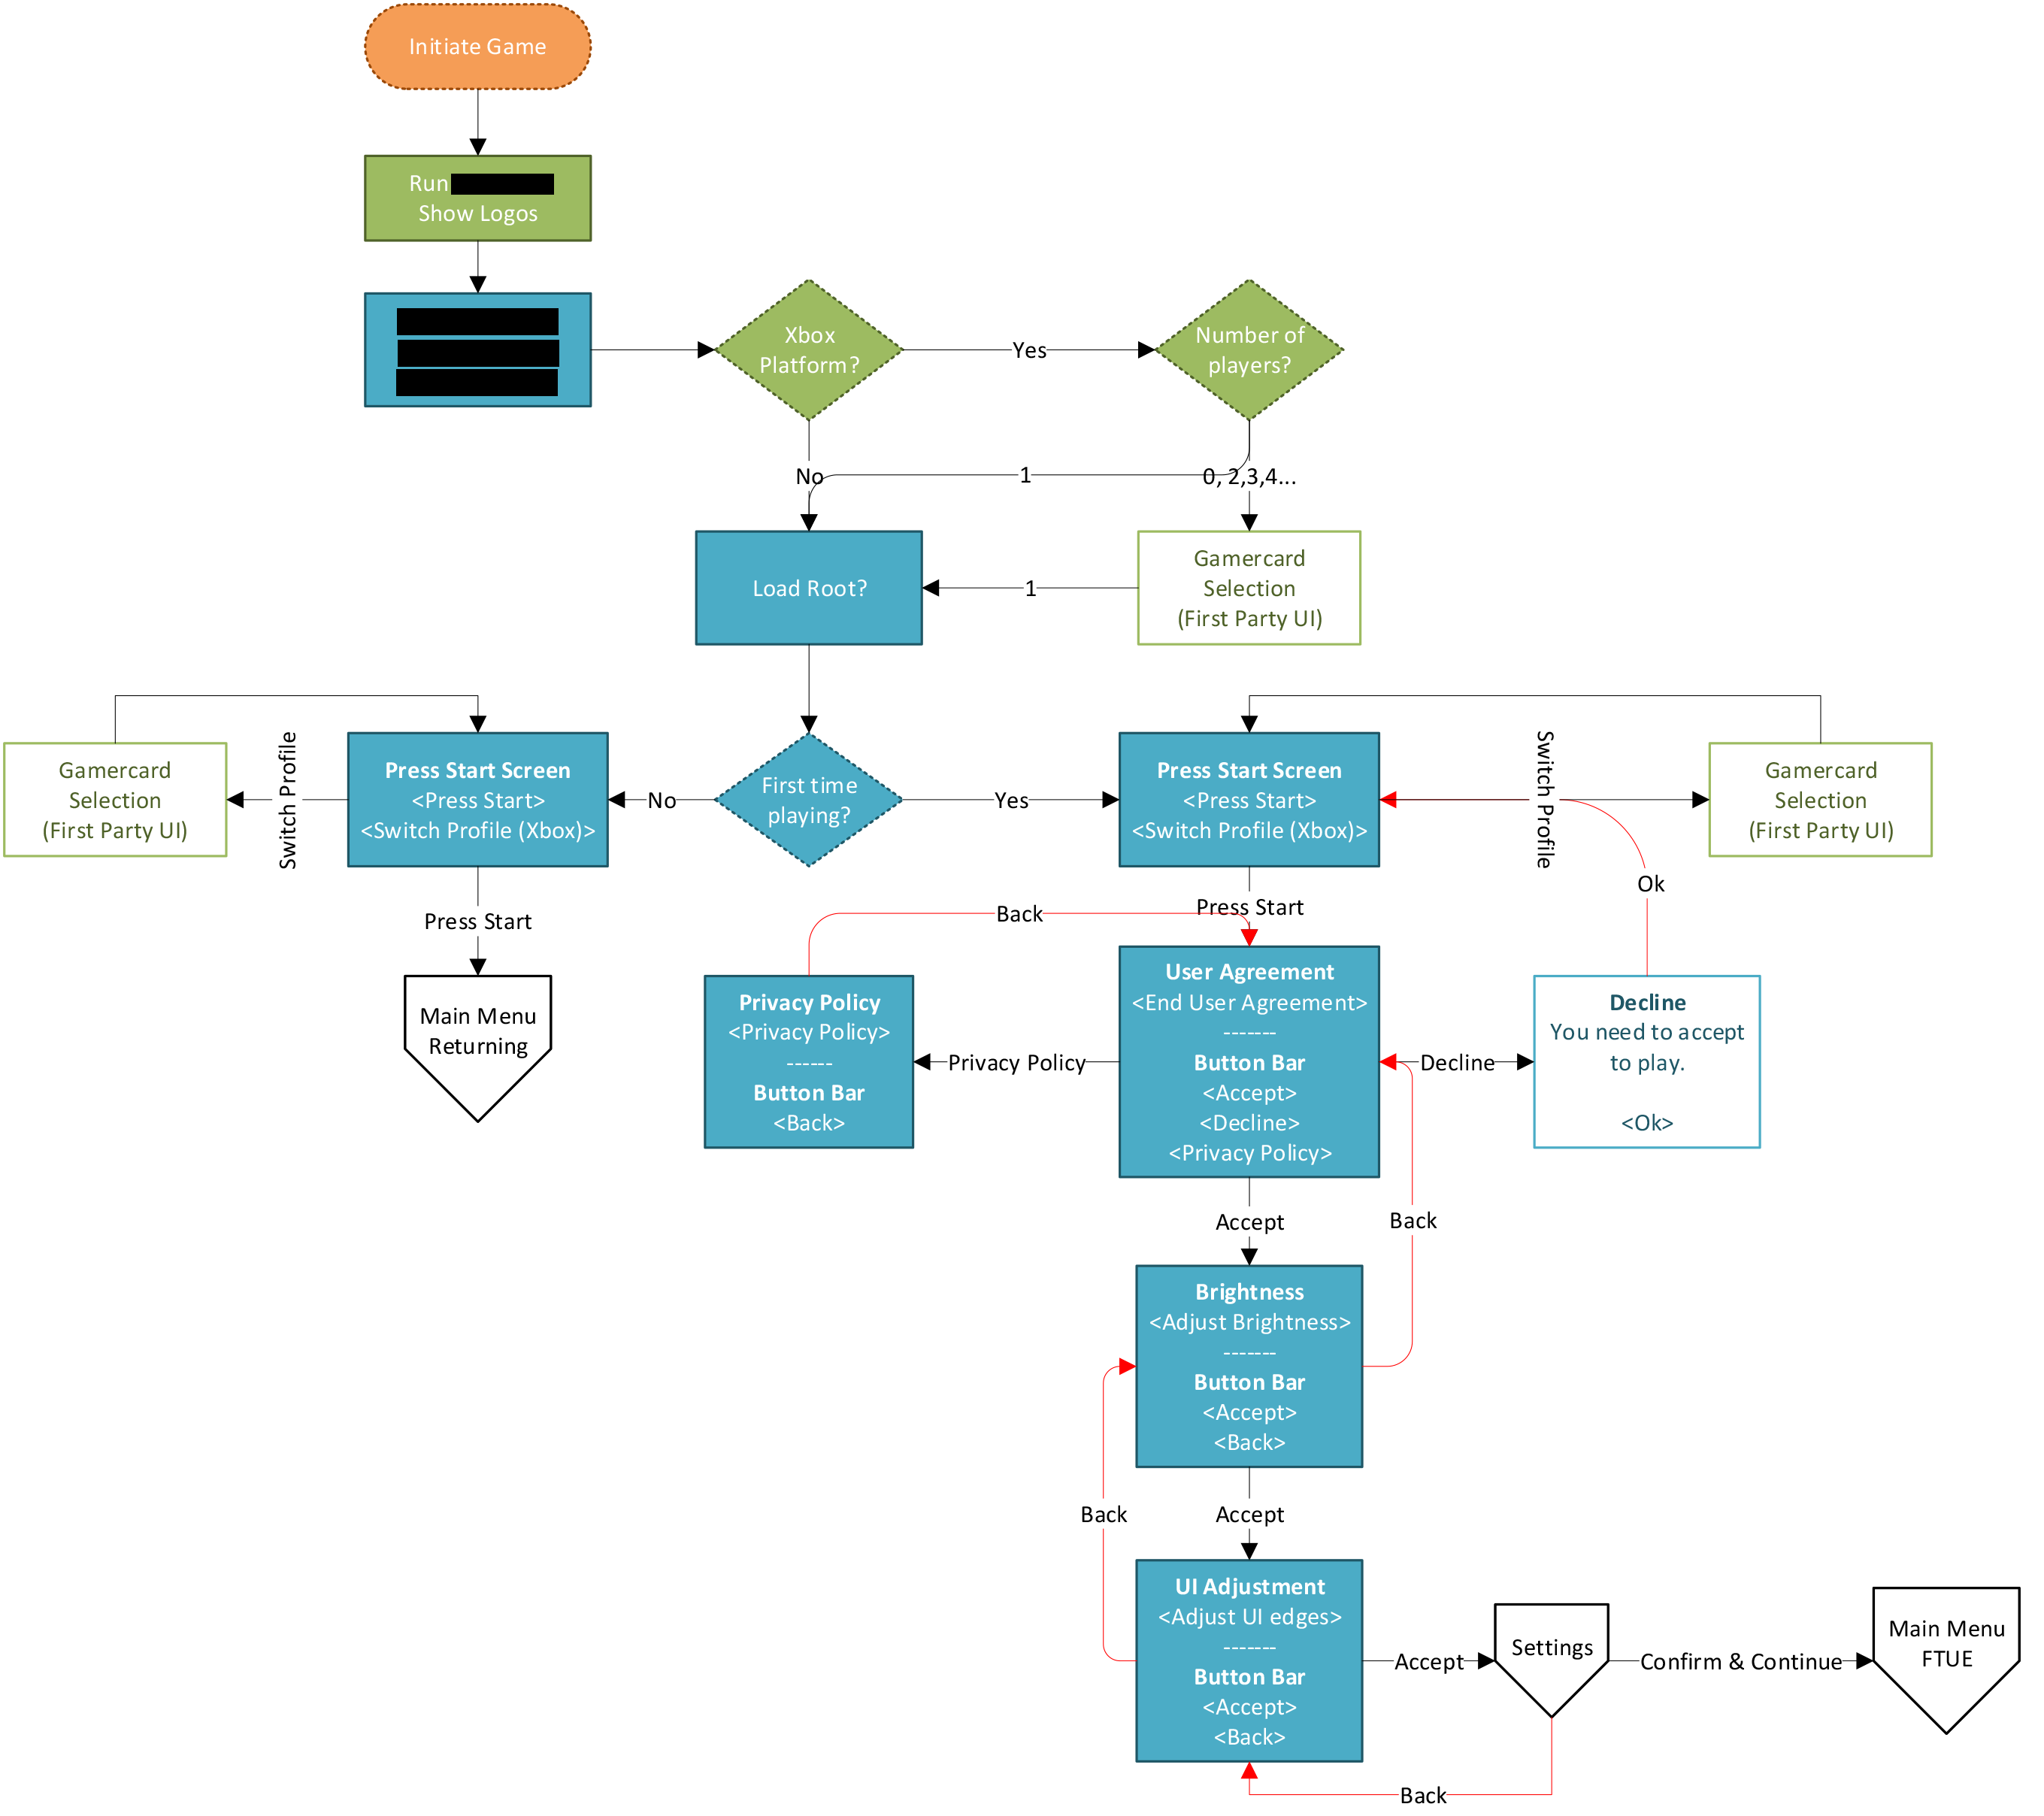 A flowchart showing the start up flow for a typical console game.